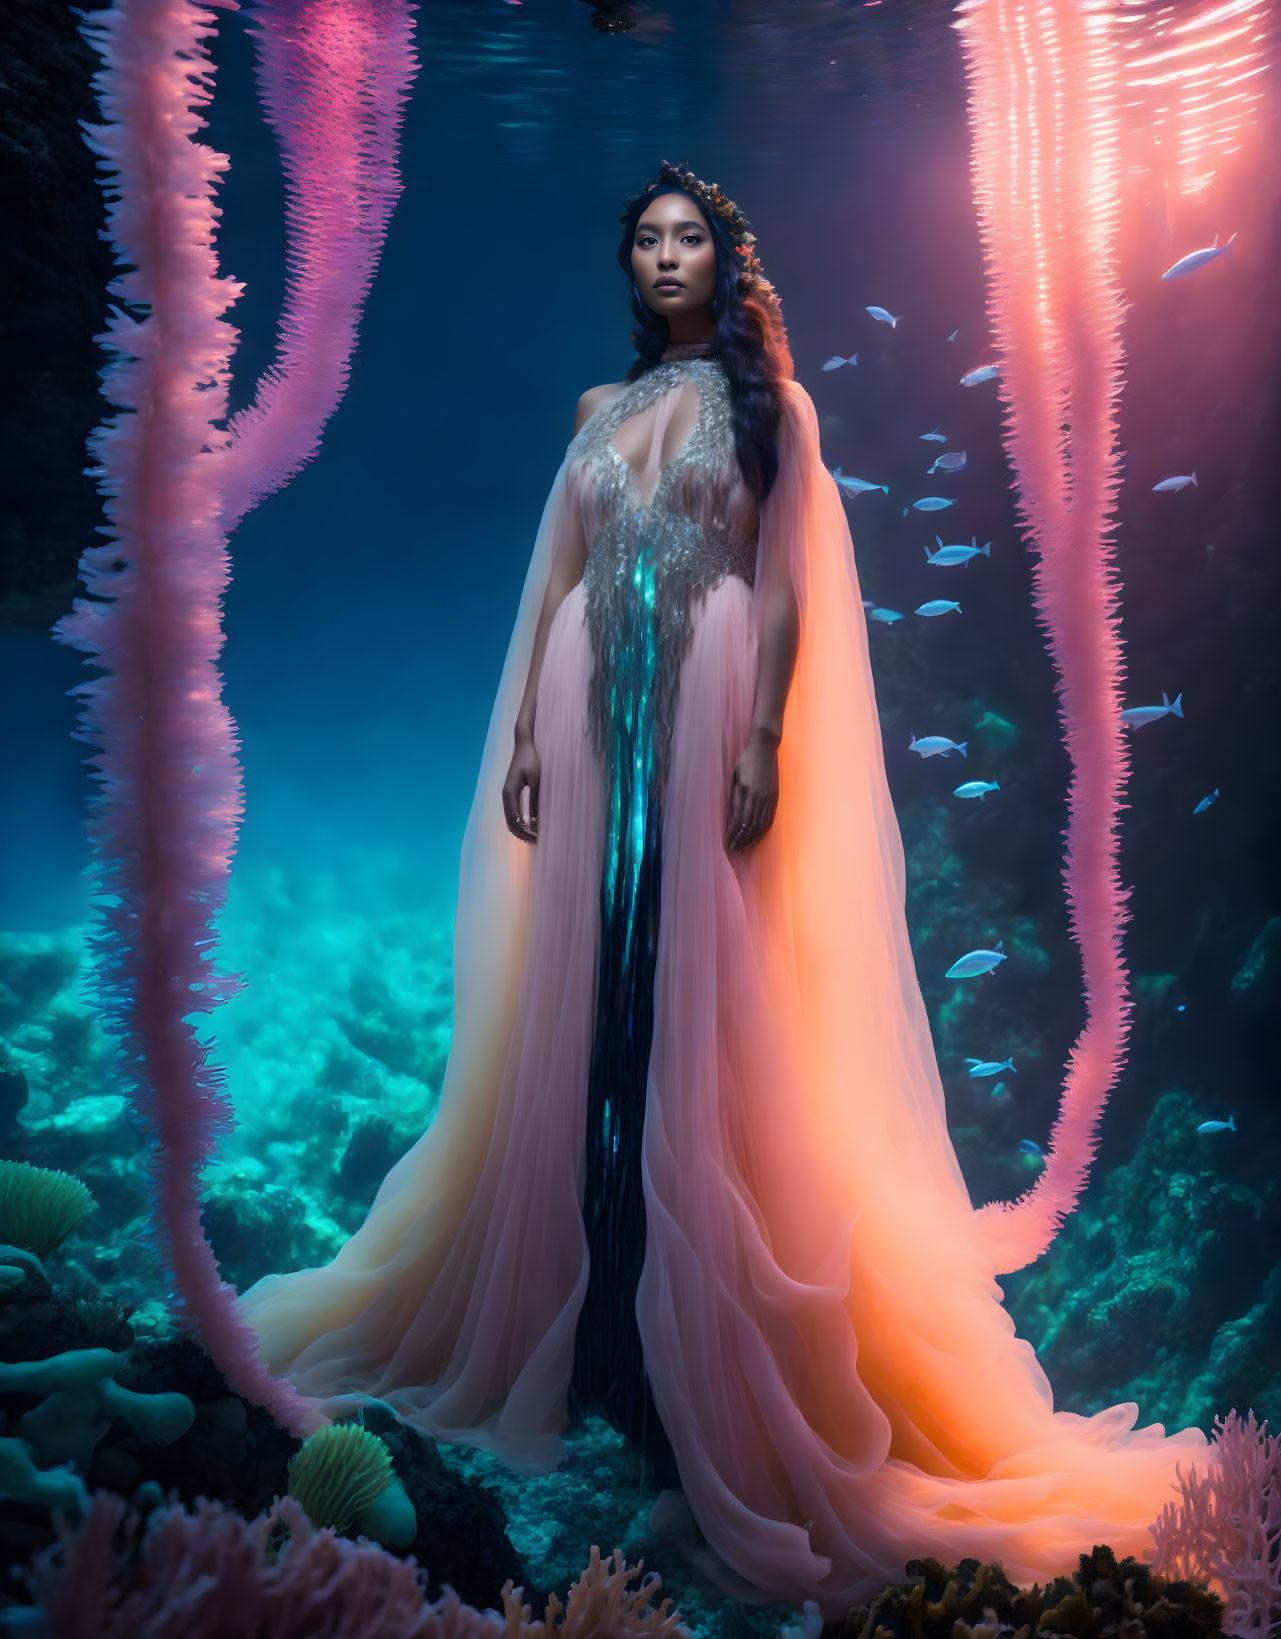 Woman in ethereal gown underwater with coral and fish in serene blue glow